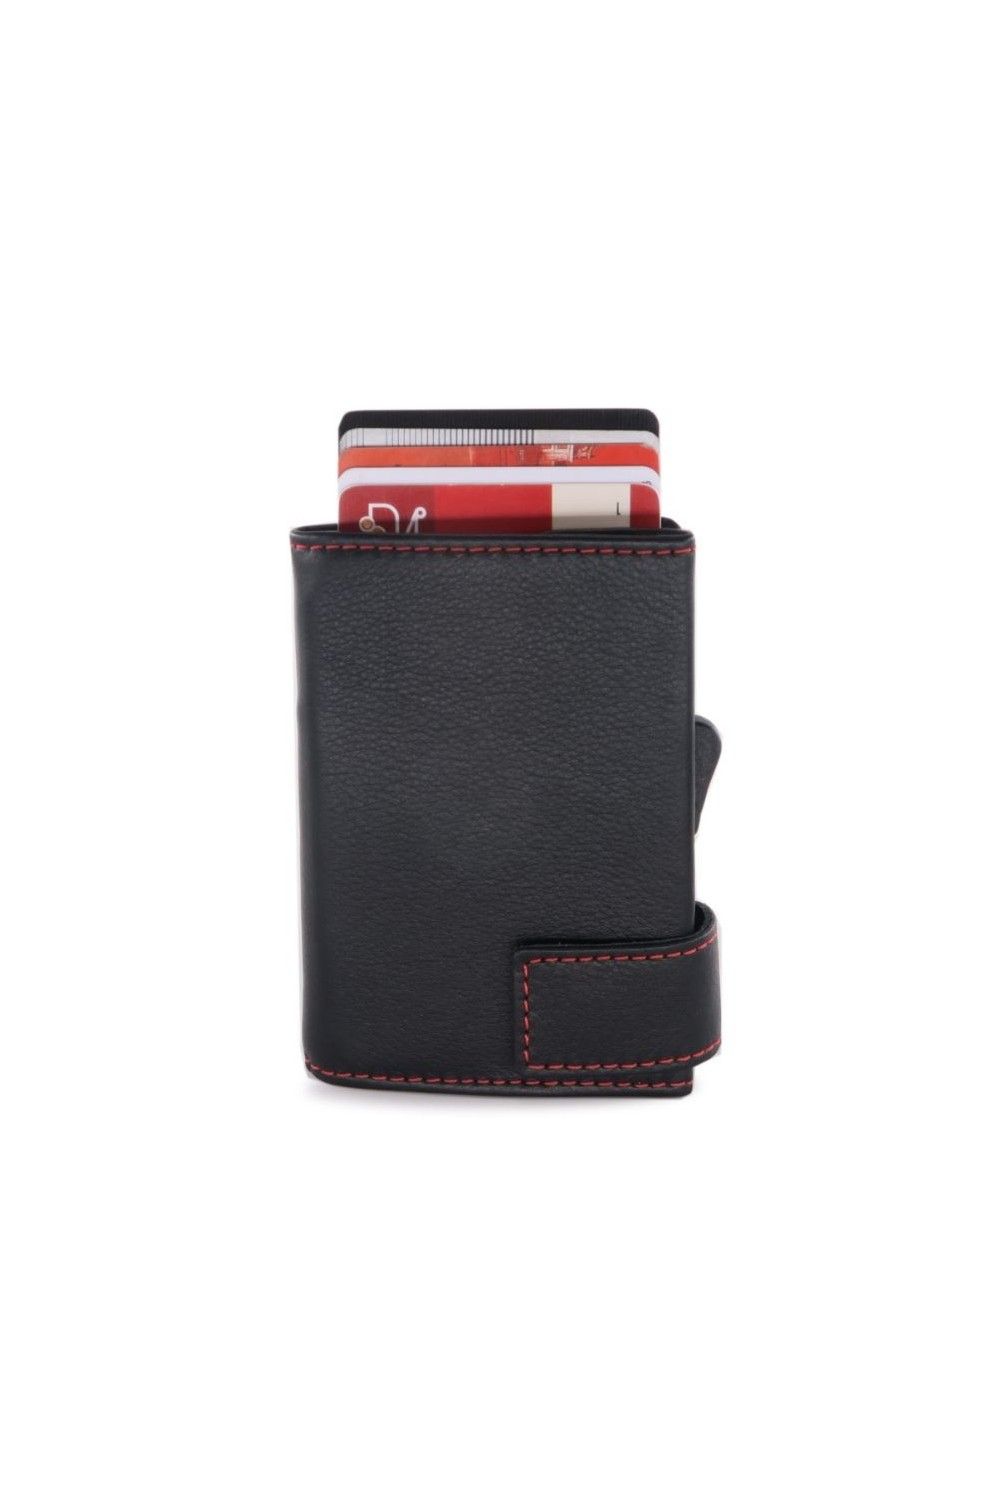 SecWal Card Case DK Leather black-red